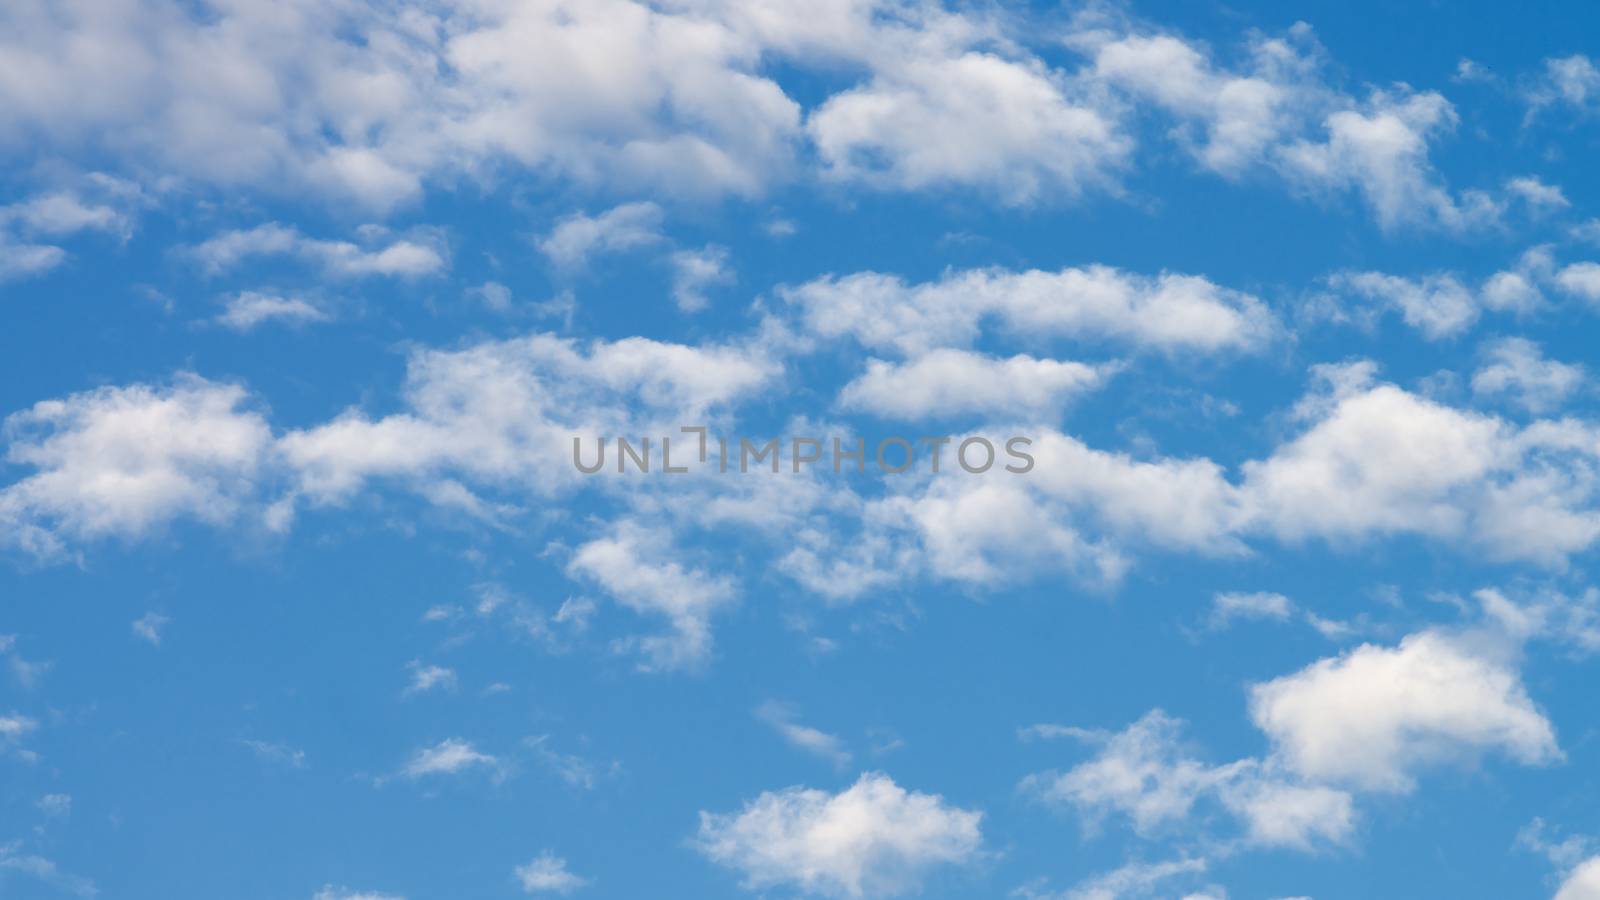 Fluffy White Clouds on Blue Sky in Sunny Day Outdoors